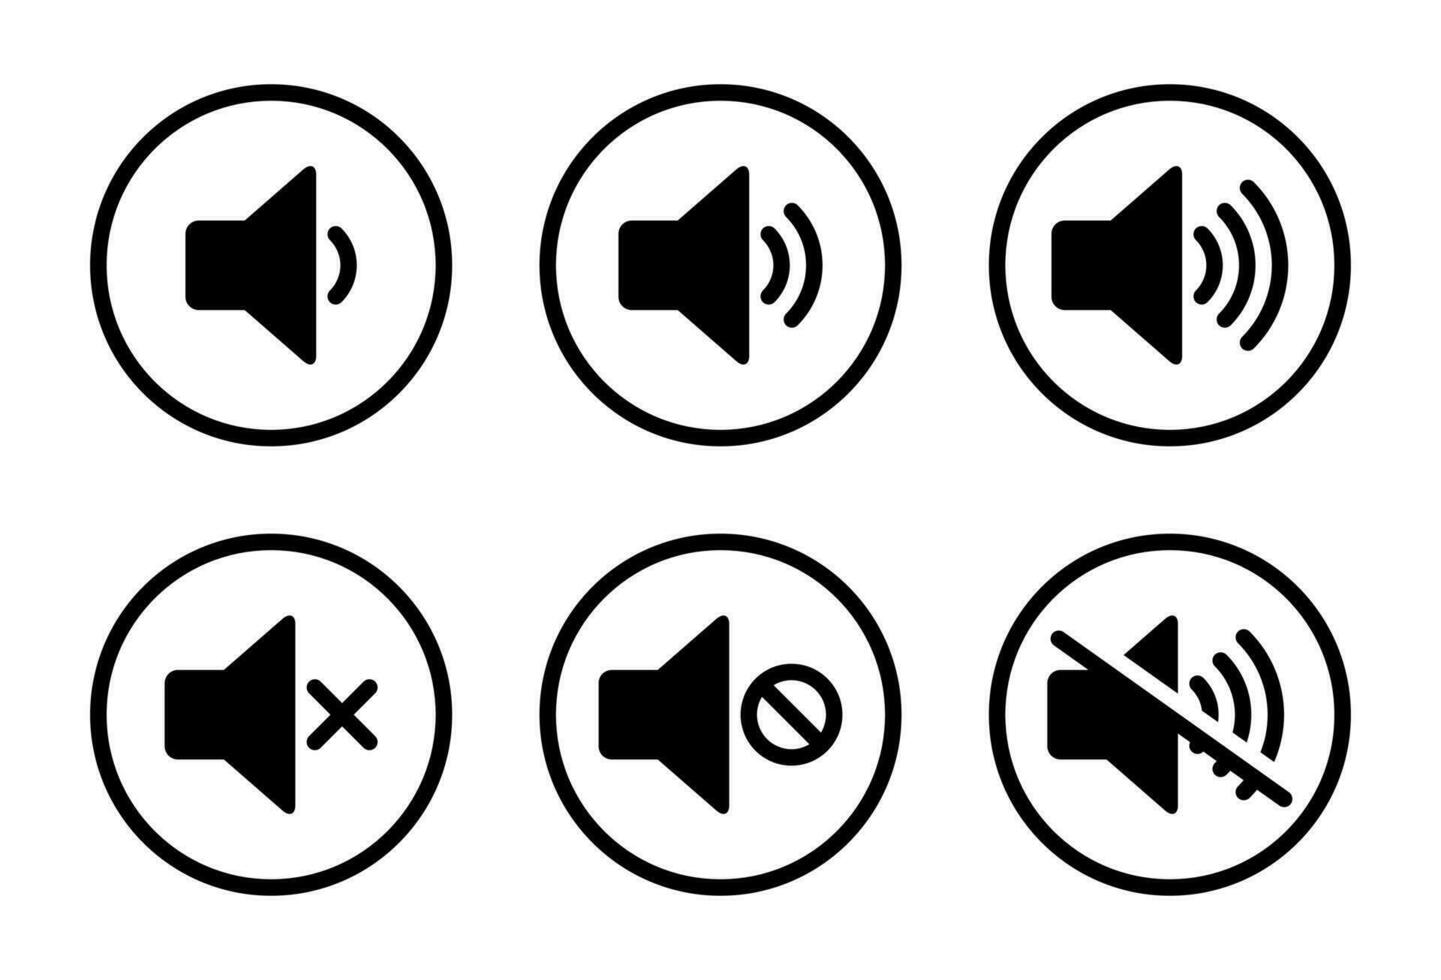 Speaker and mute volume icon vector in circle line. Sound, audio off sign symbol